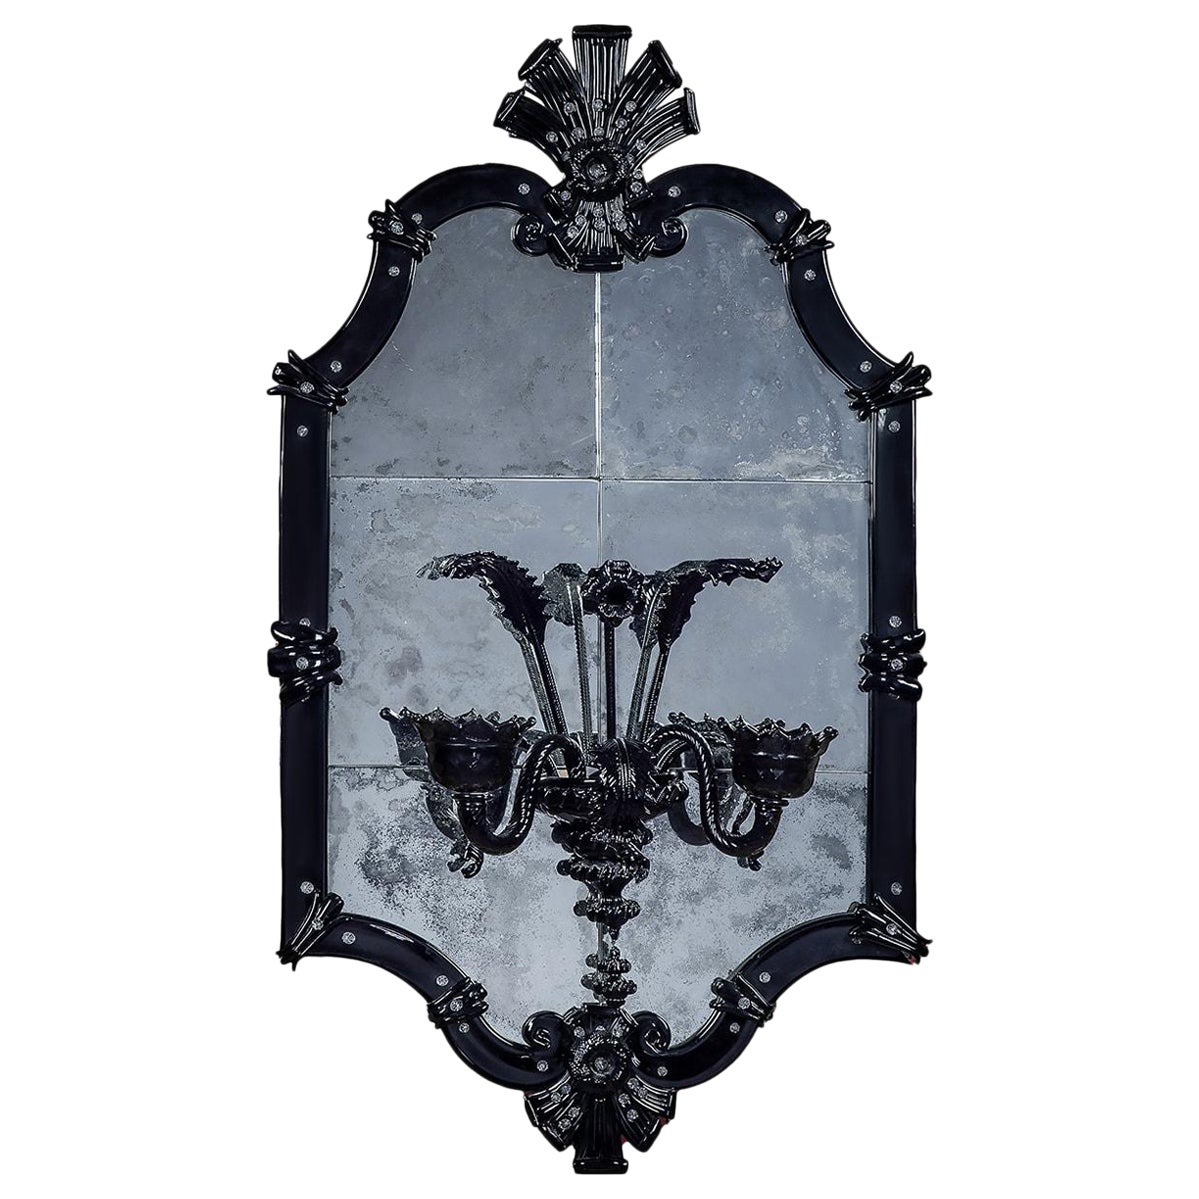 Ca'Giustinian Murano Glass Mirror with 2 Lights For Sale